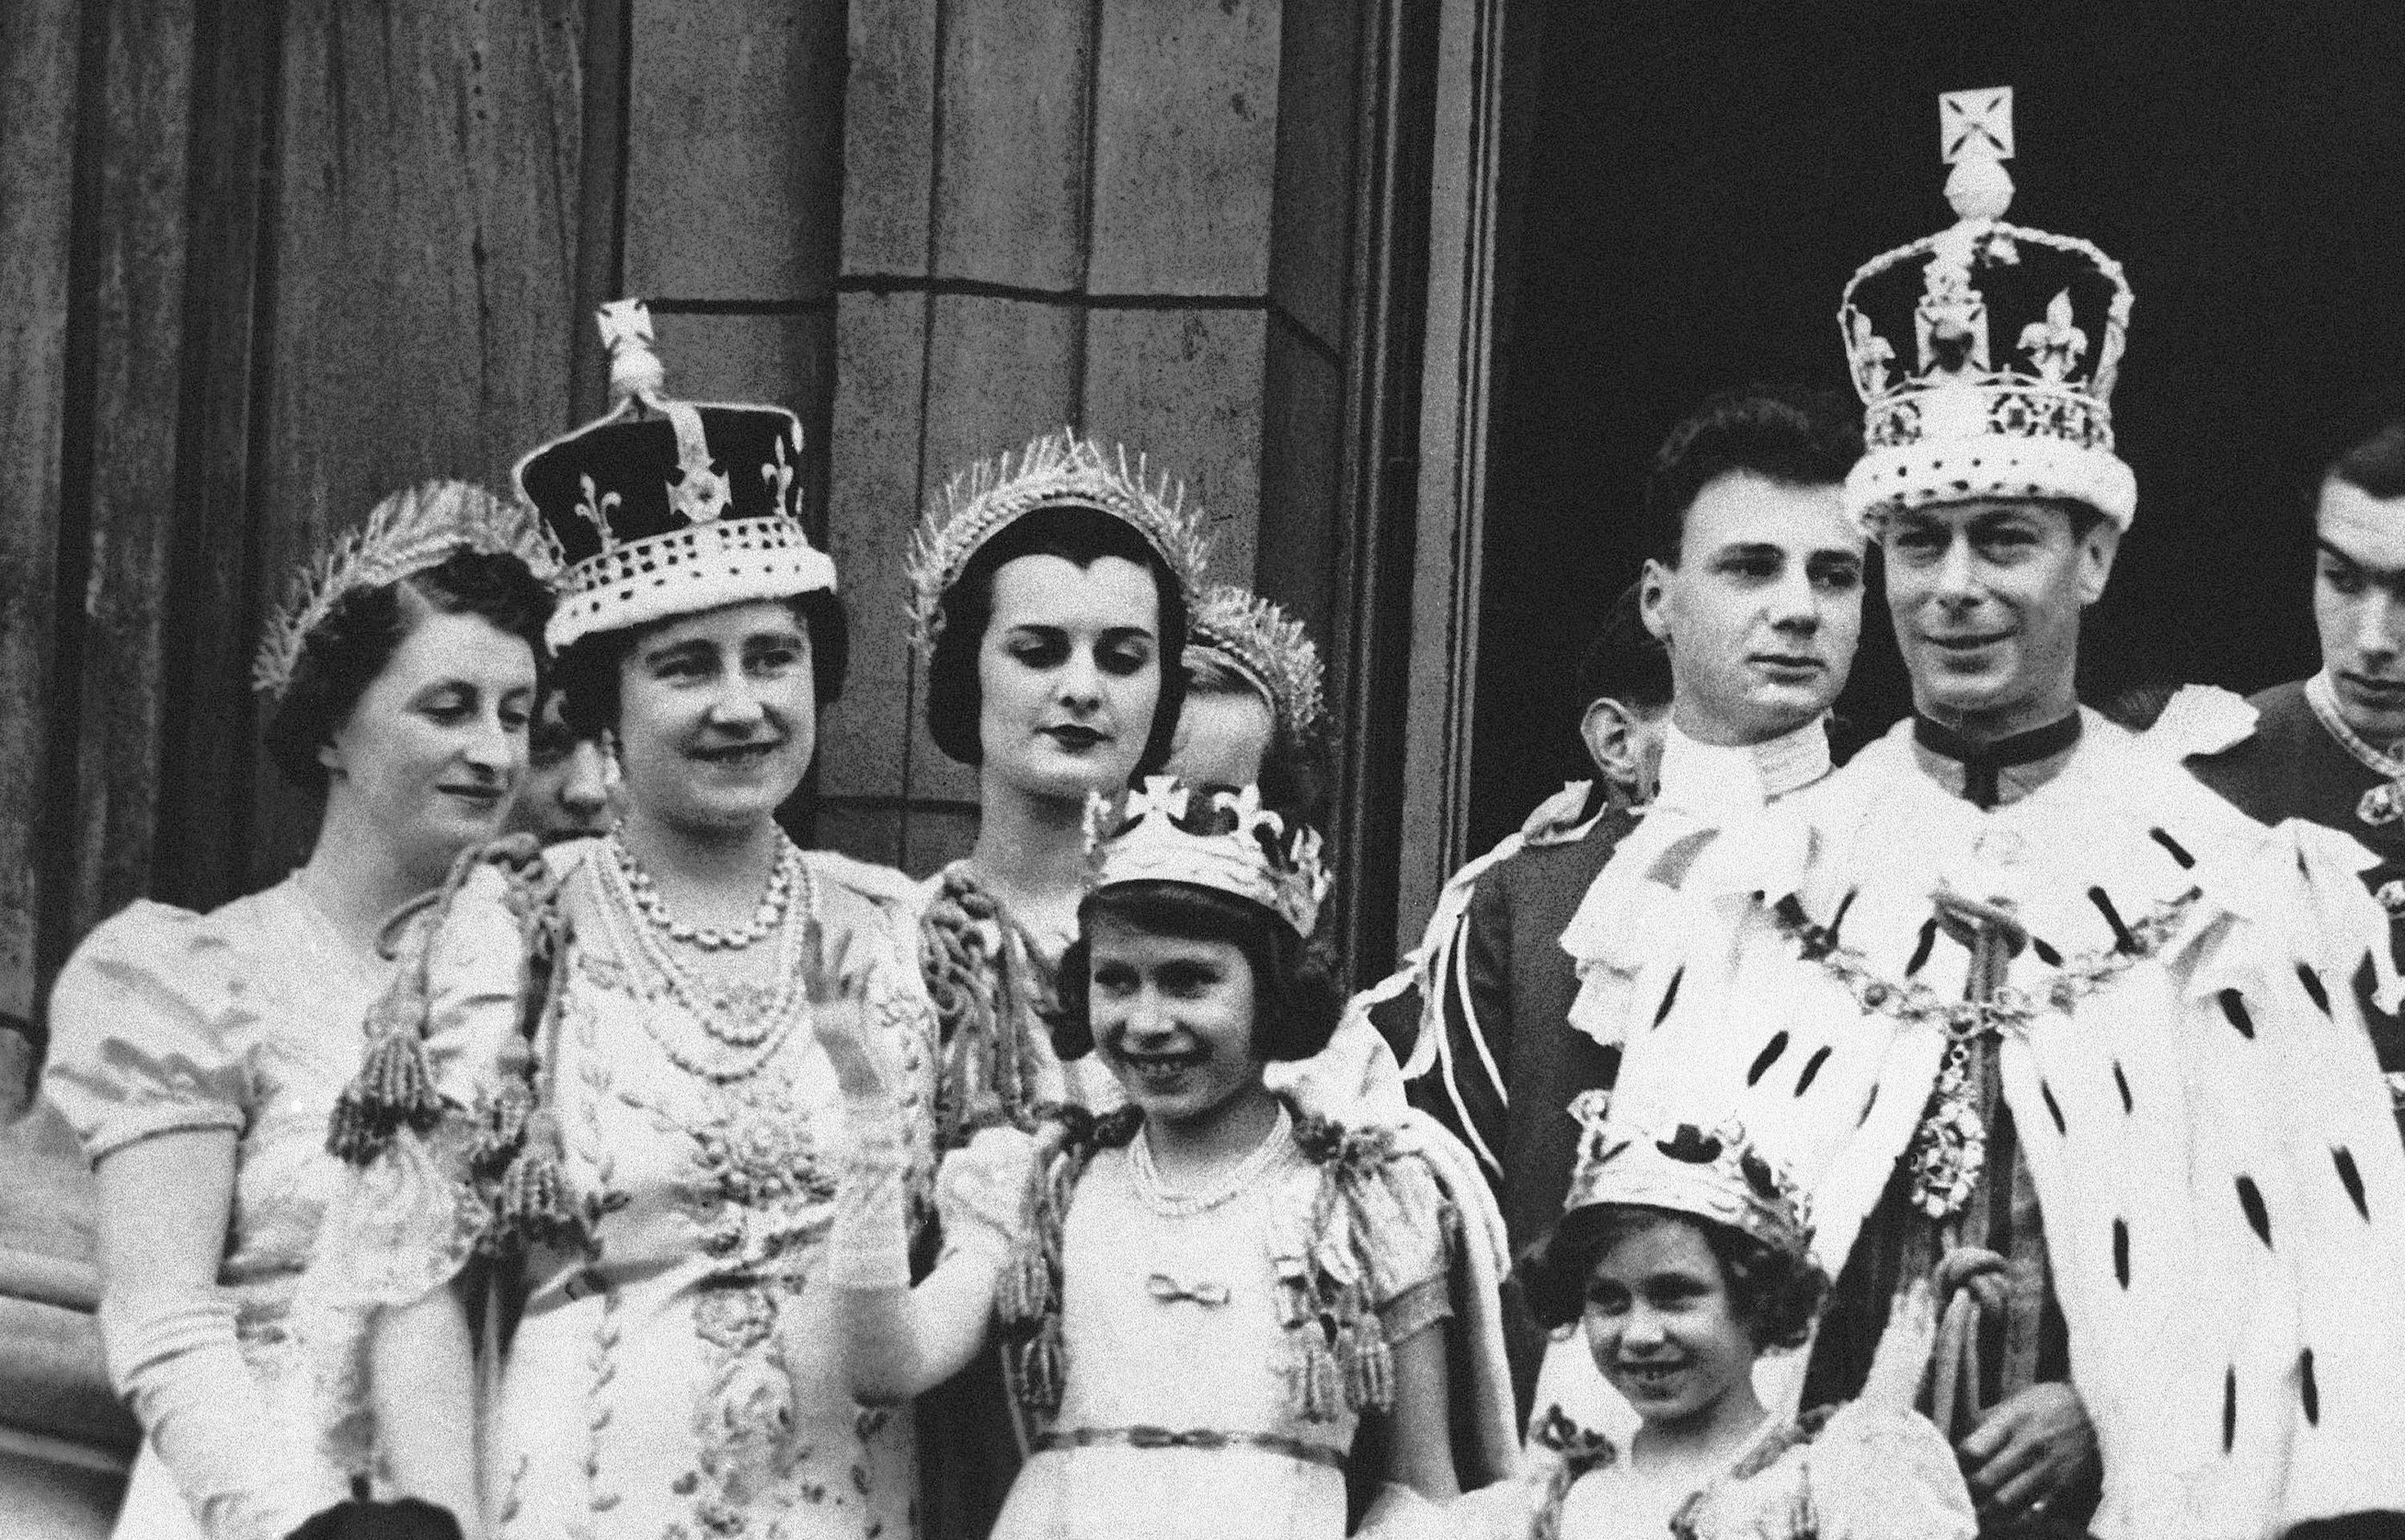 King's Birthday: Biggest change to public holiday in 70 years